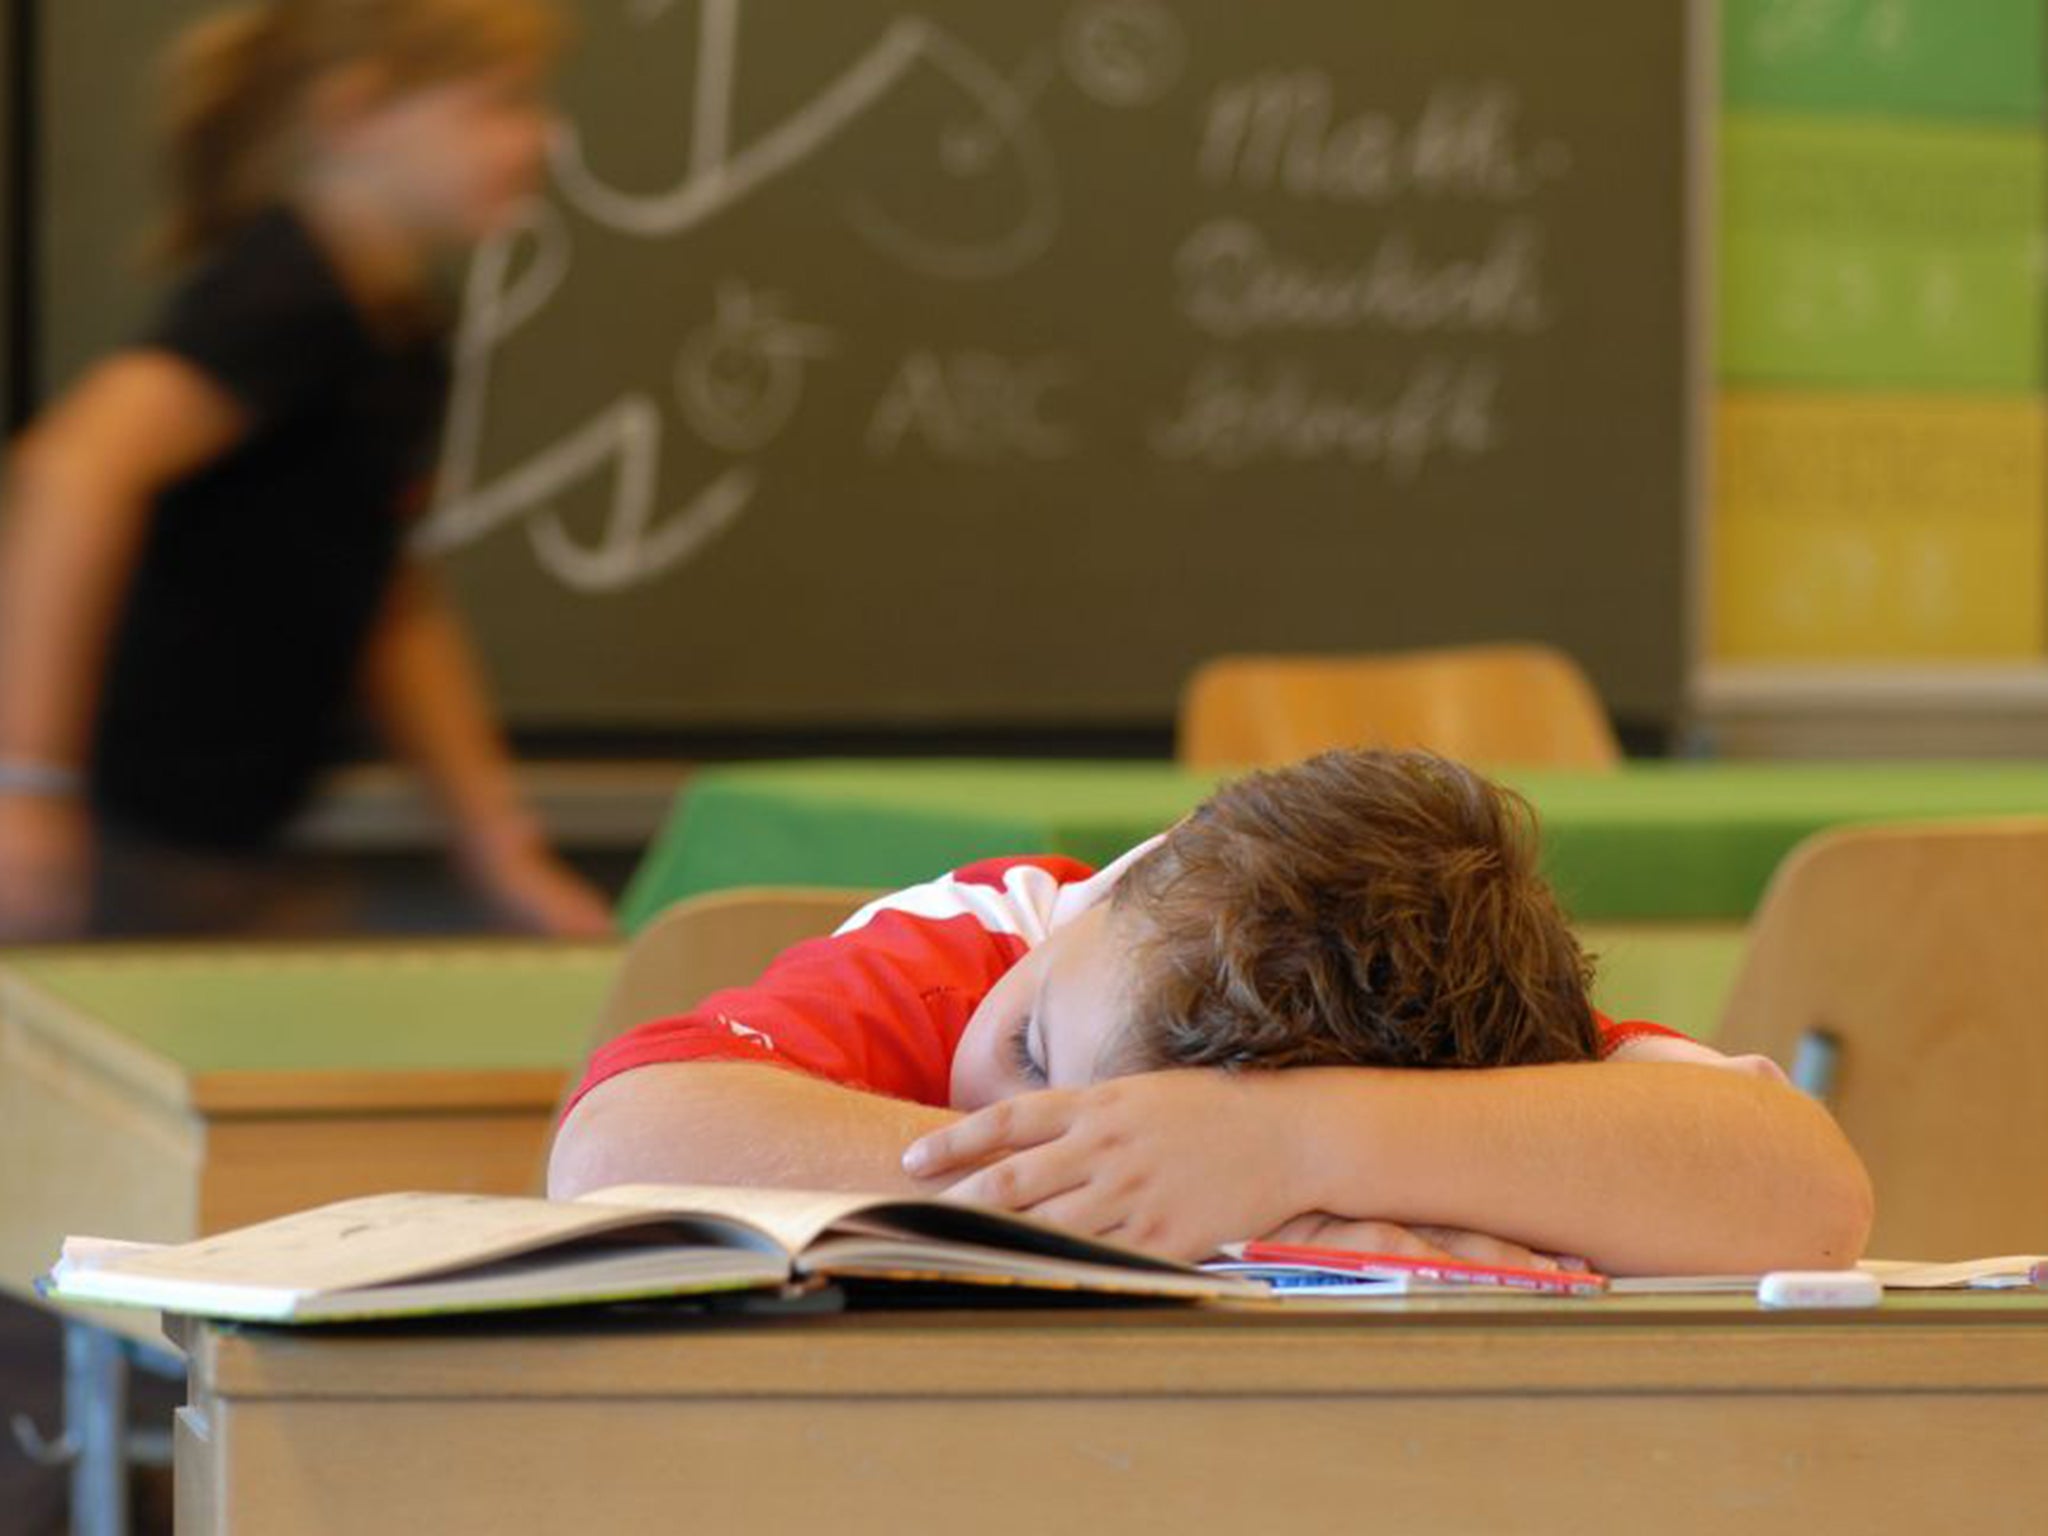 Learning suffers when diet and sleep are poor, say teaching staff